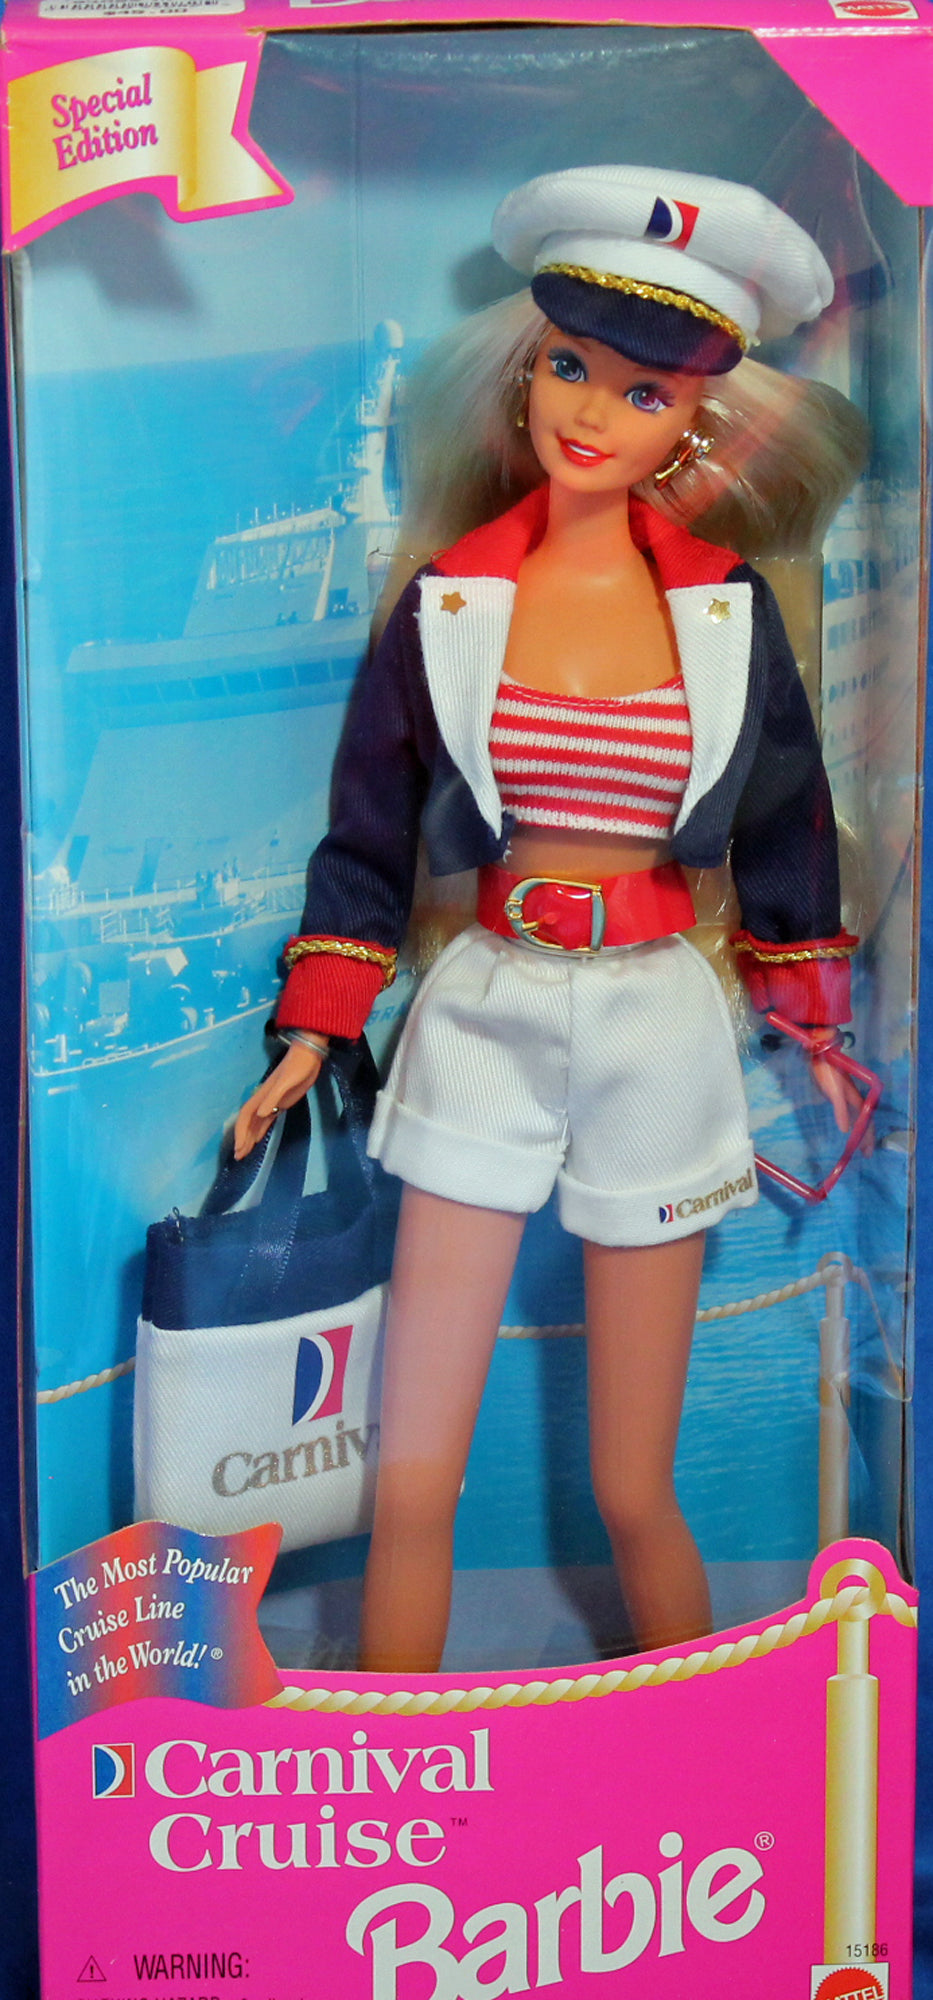 Carnival Cruise Barbie 1997 Special Edition Vacation Ship Mattel Doll 15186  Vtg